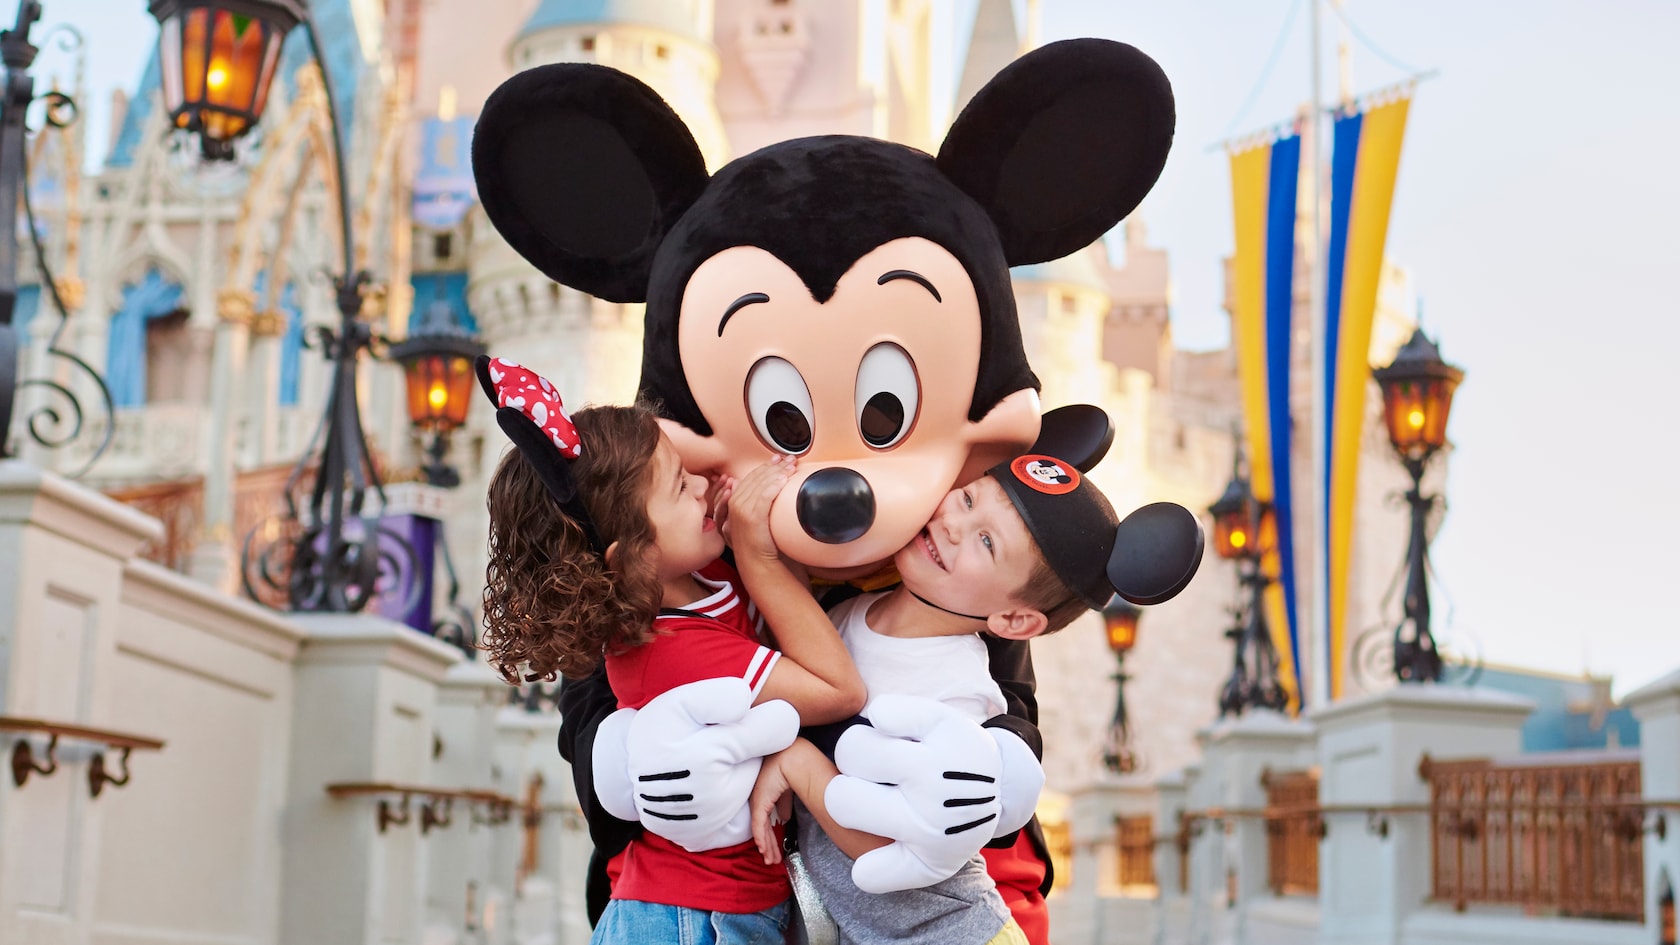 Are Kids Free at Disney World? - The Family Vacation Guide